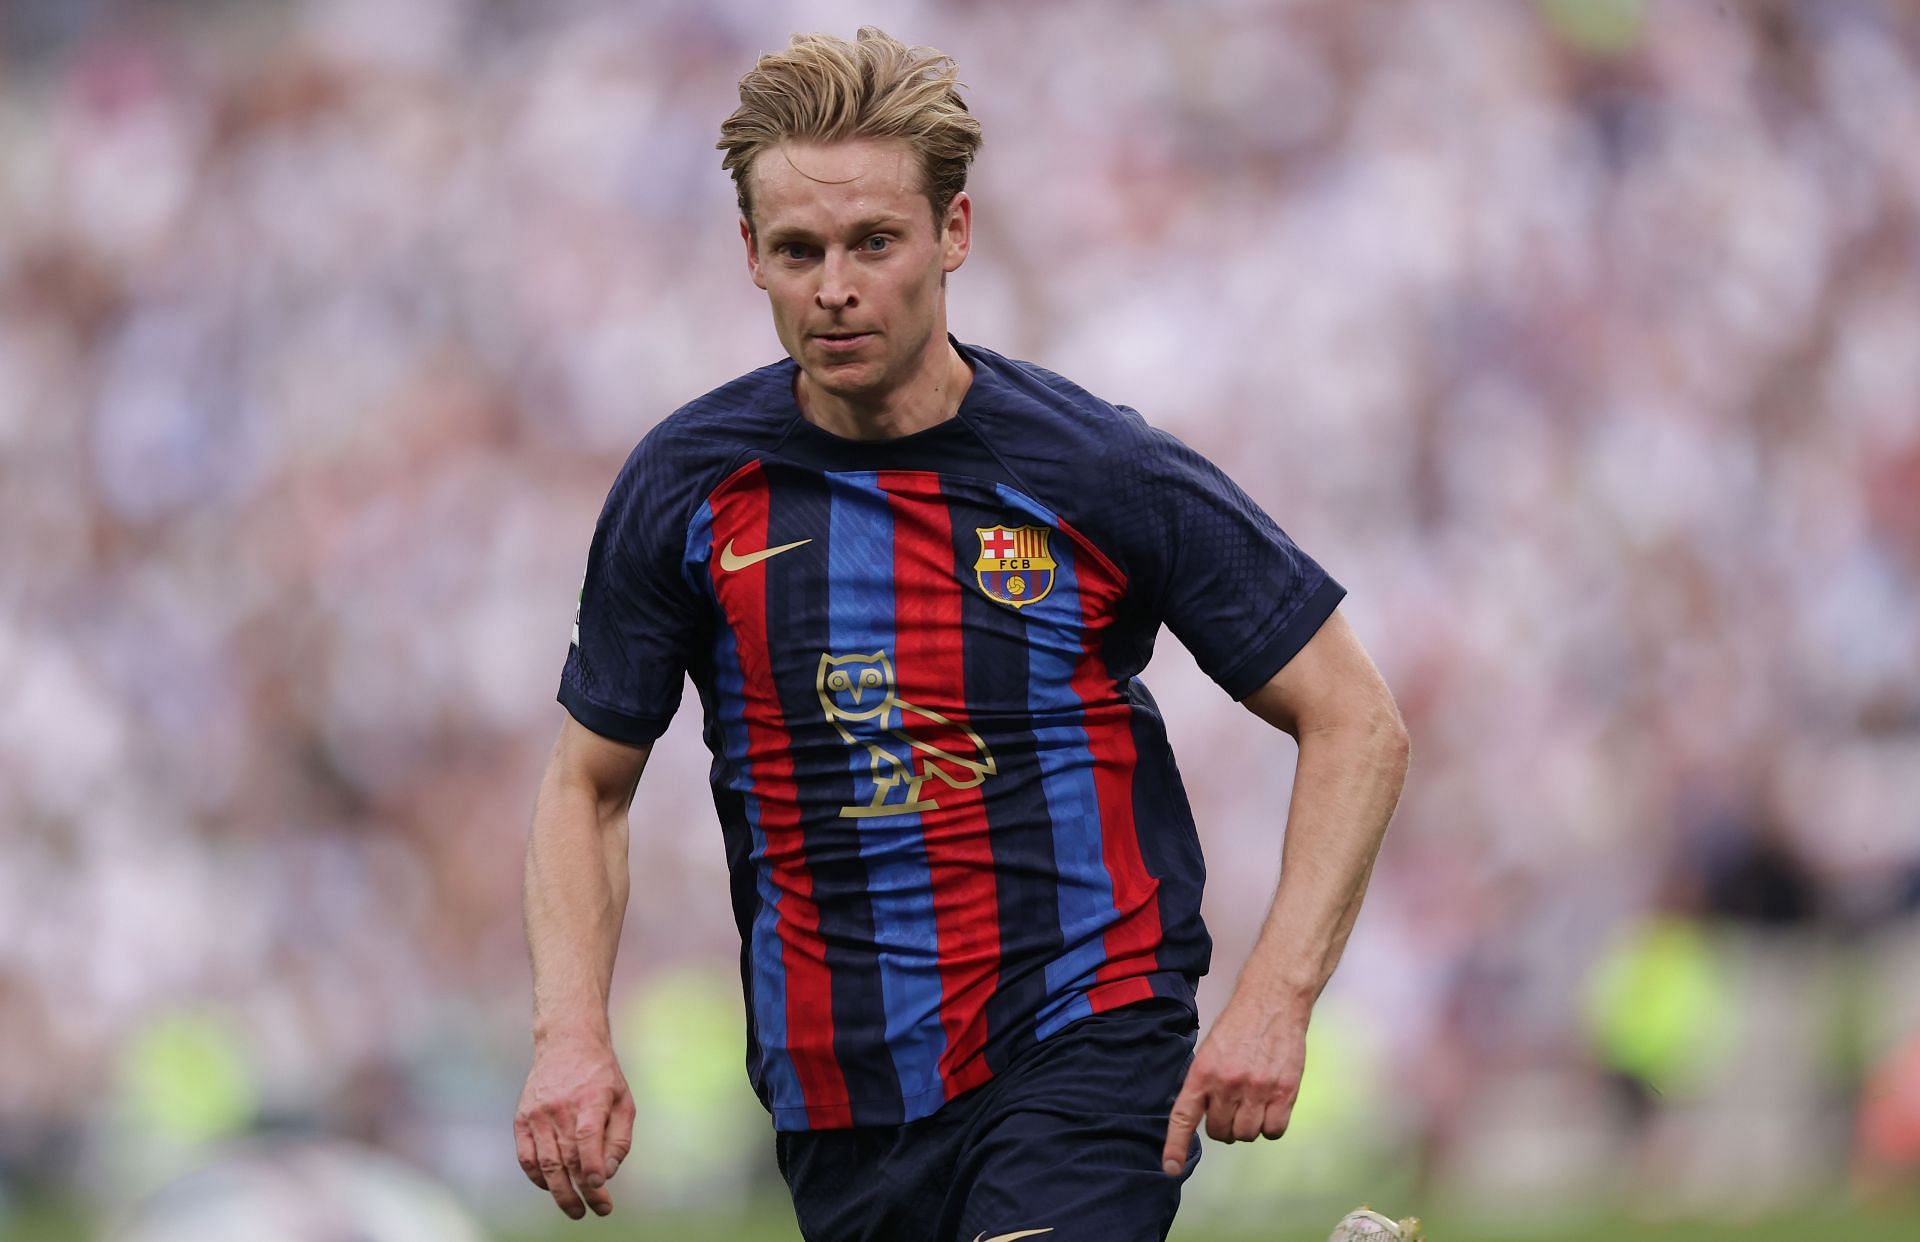 Barcelona tried to sell Frenkie de Jong during the summer window